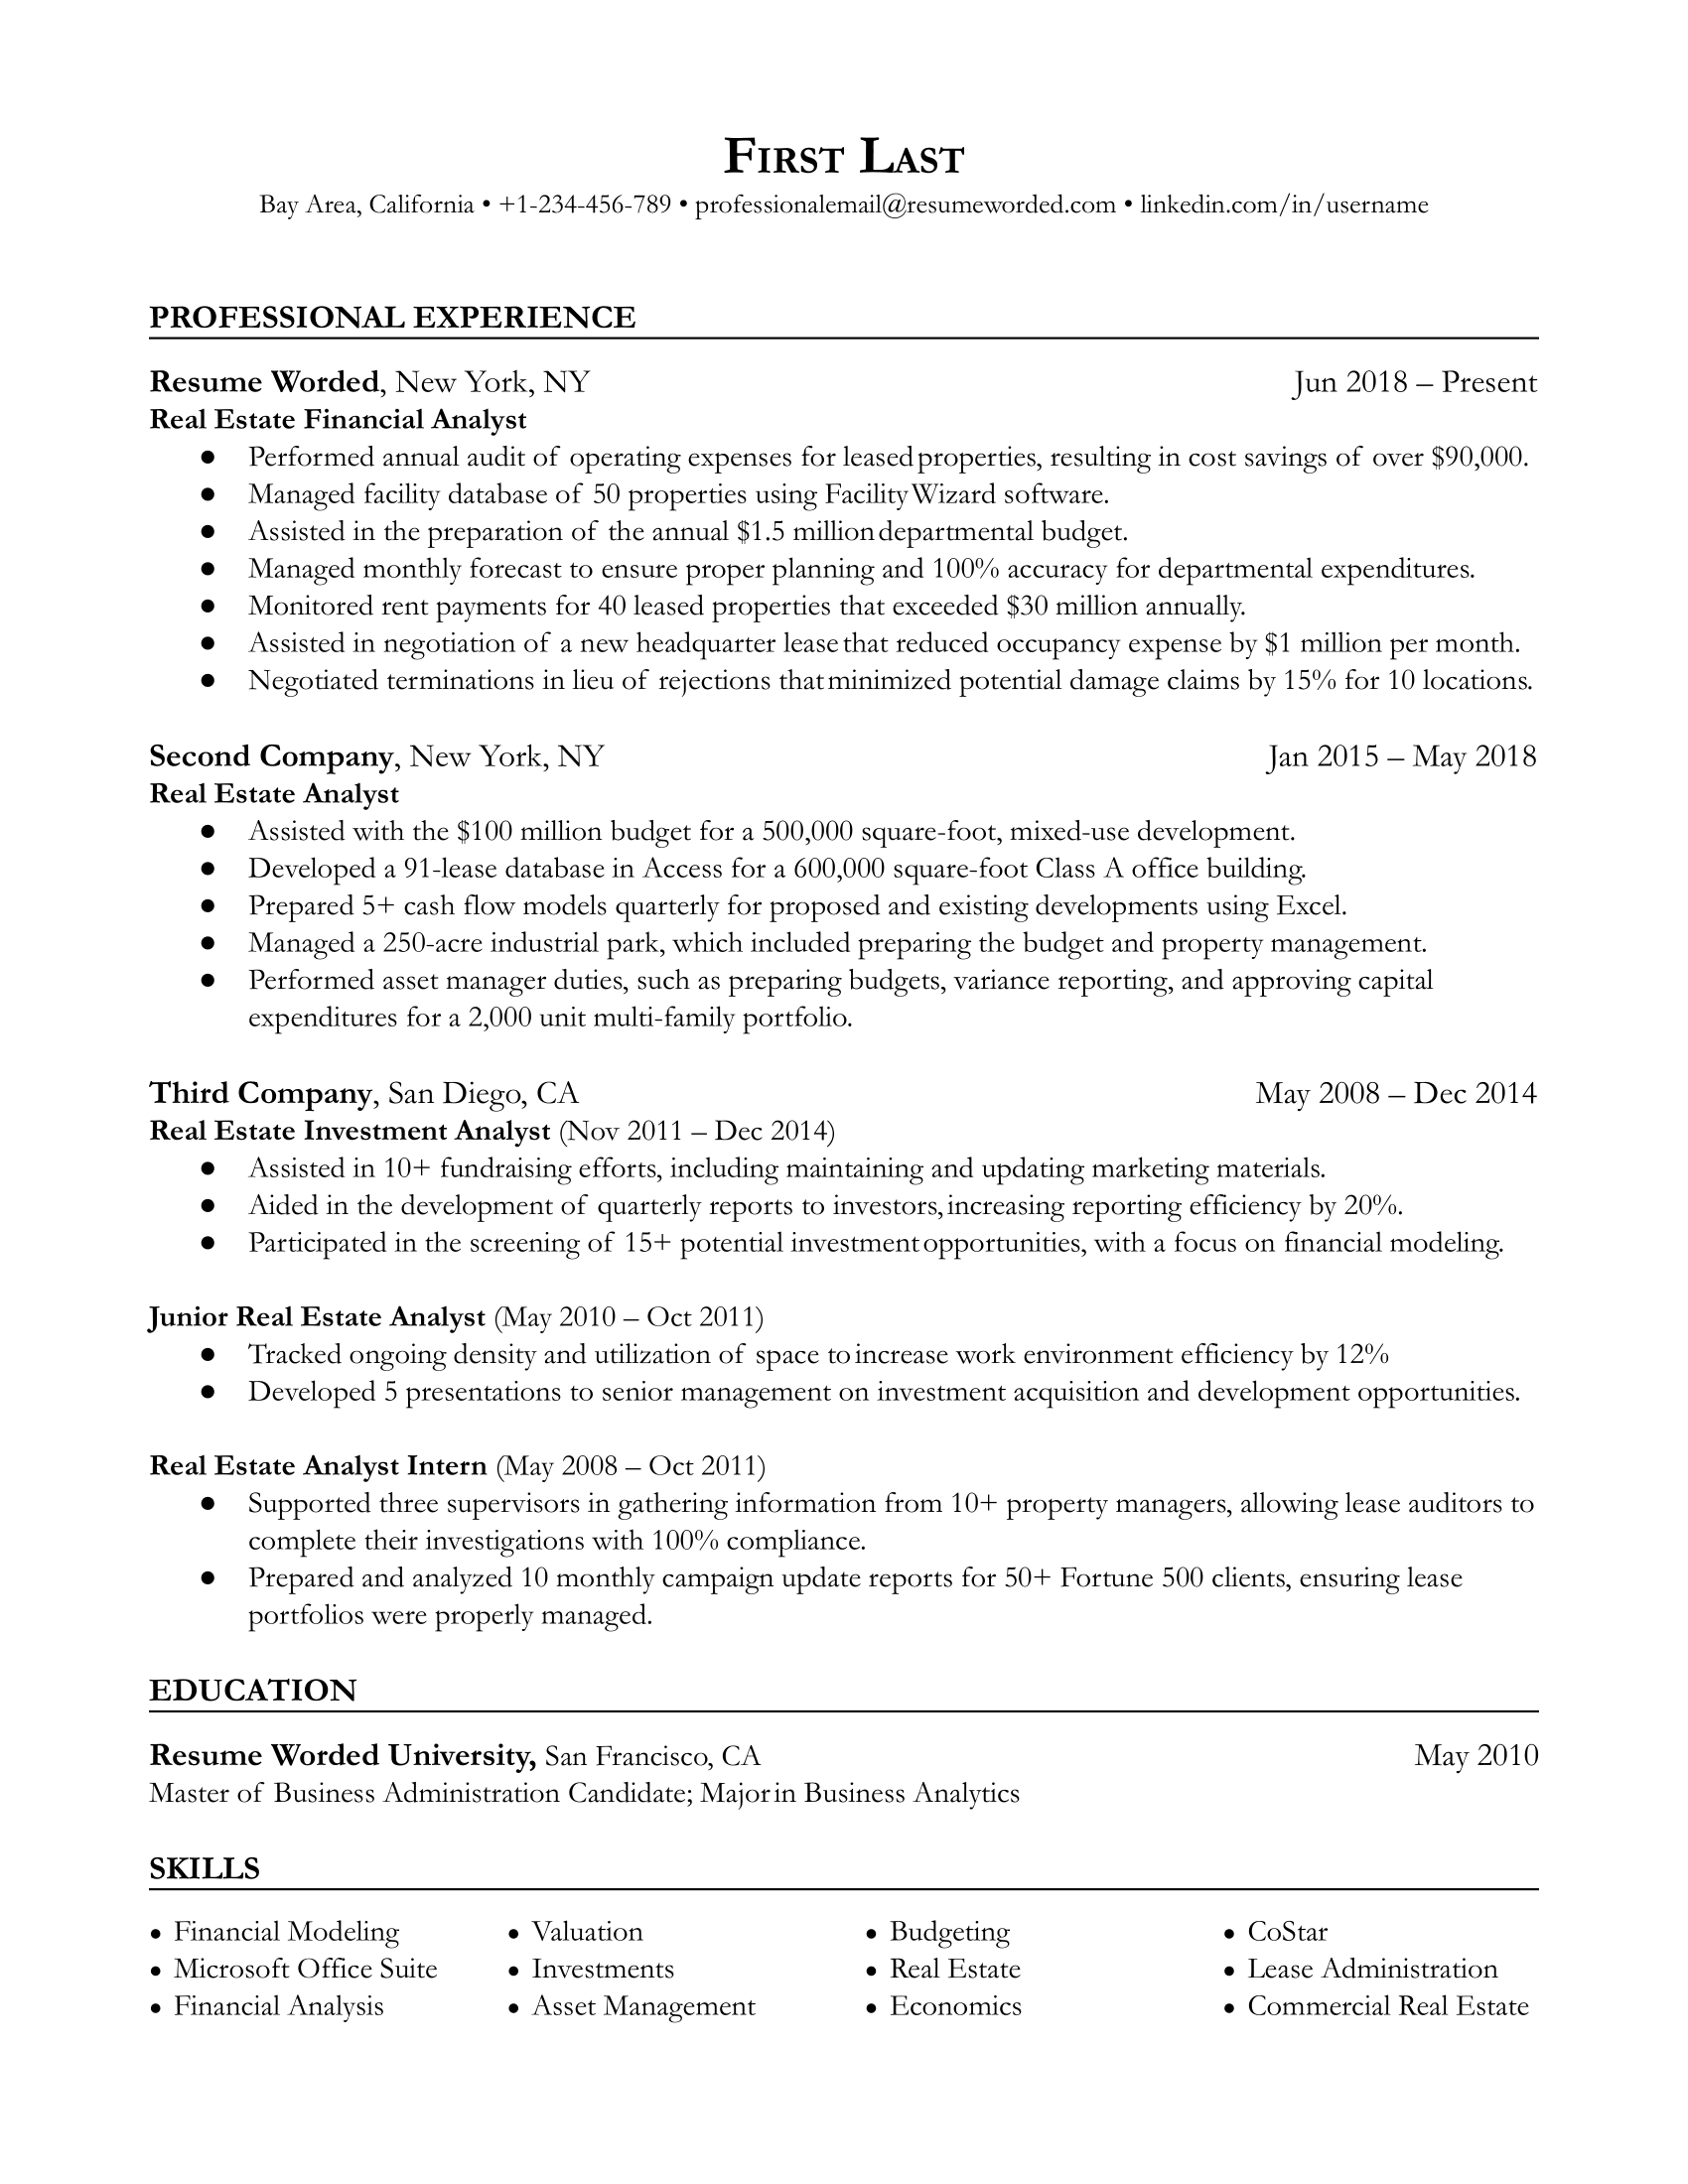 A well-structured real estate financial analyst CV showcasing specific skills and experiences.